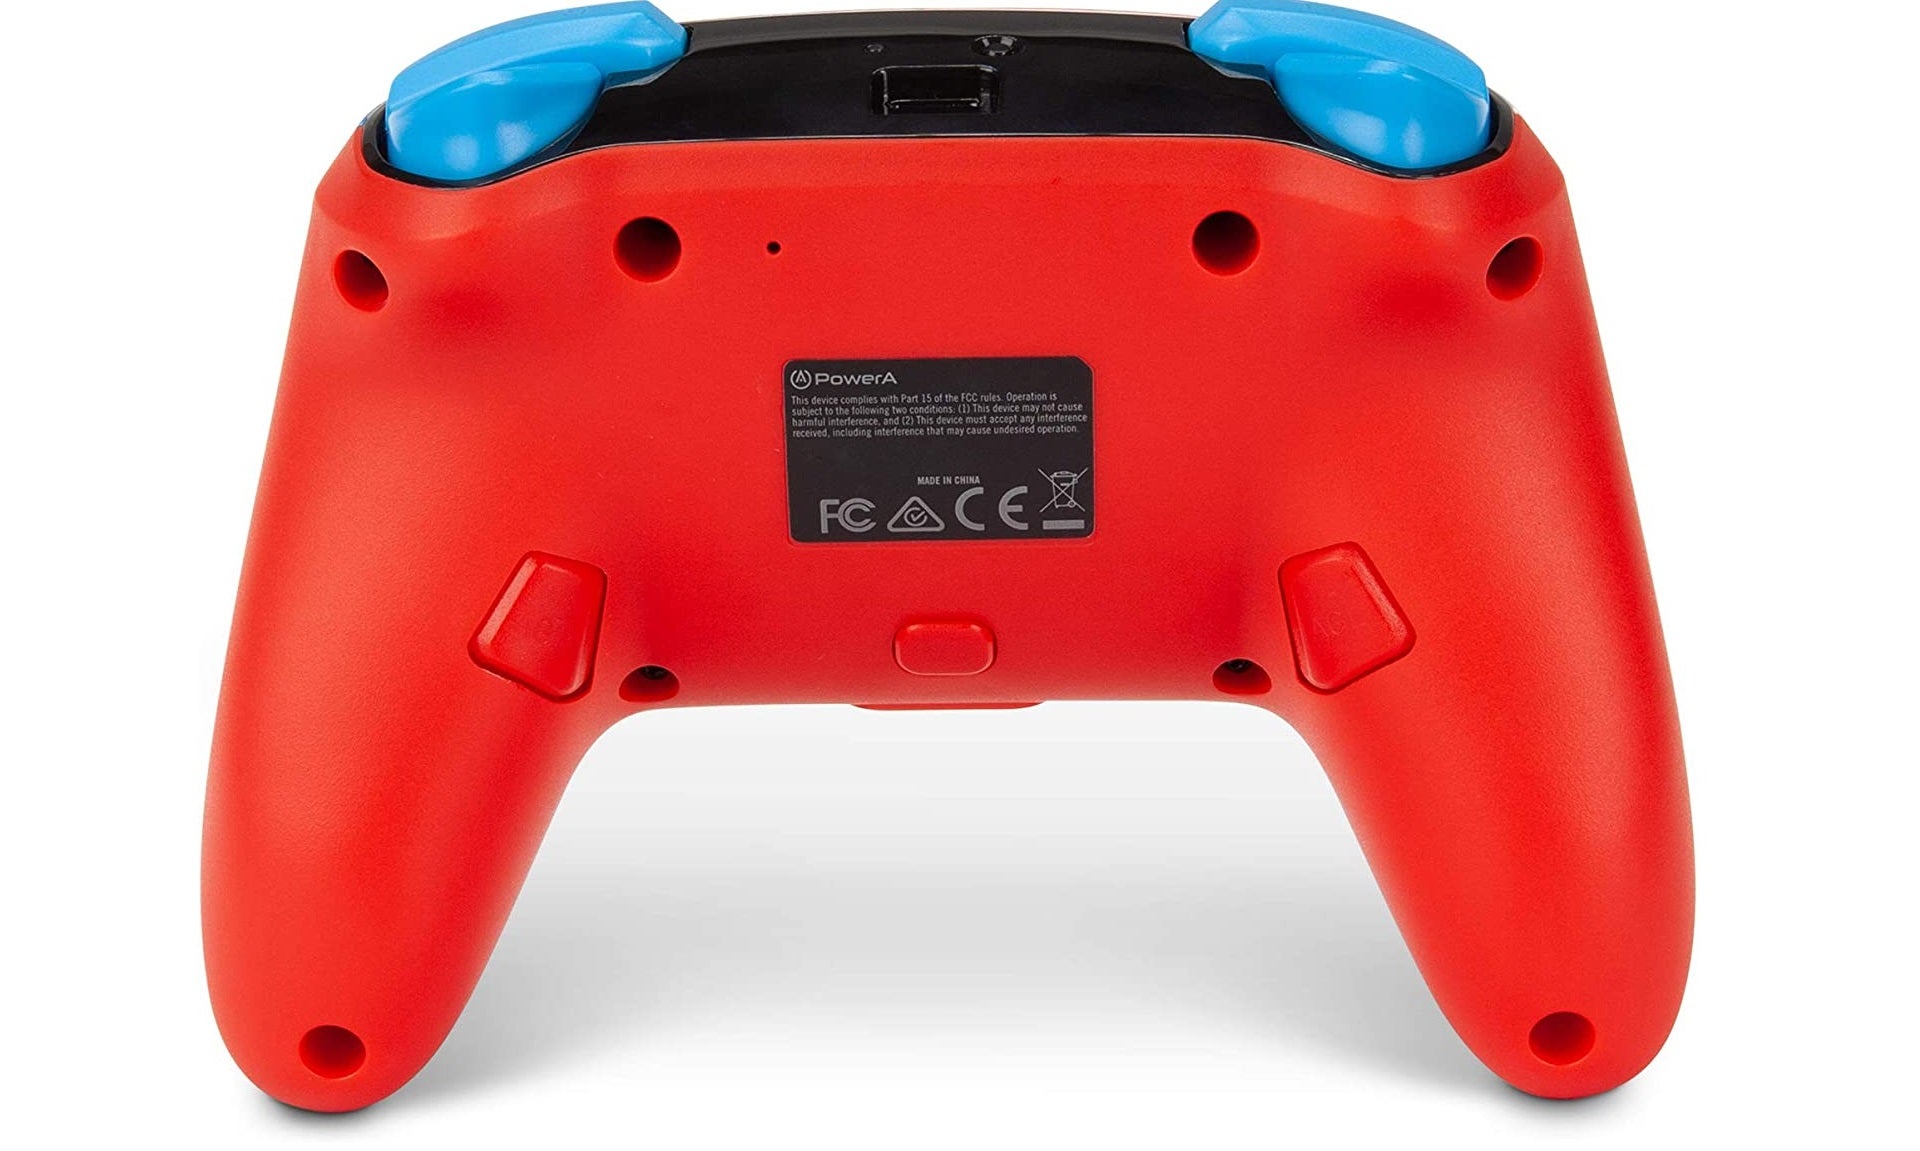 Back side of Mario branded PowerA wireless controller for the Nintendo Switch